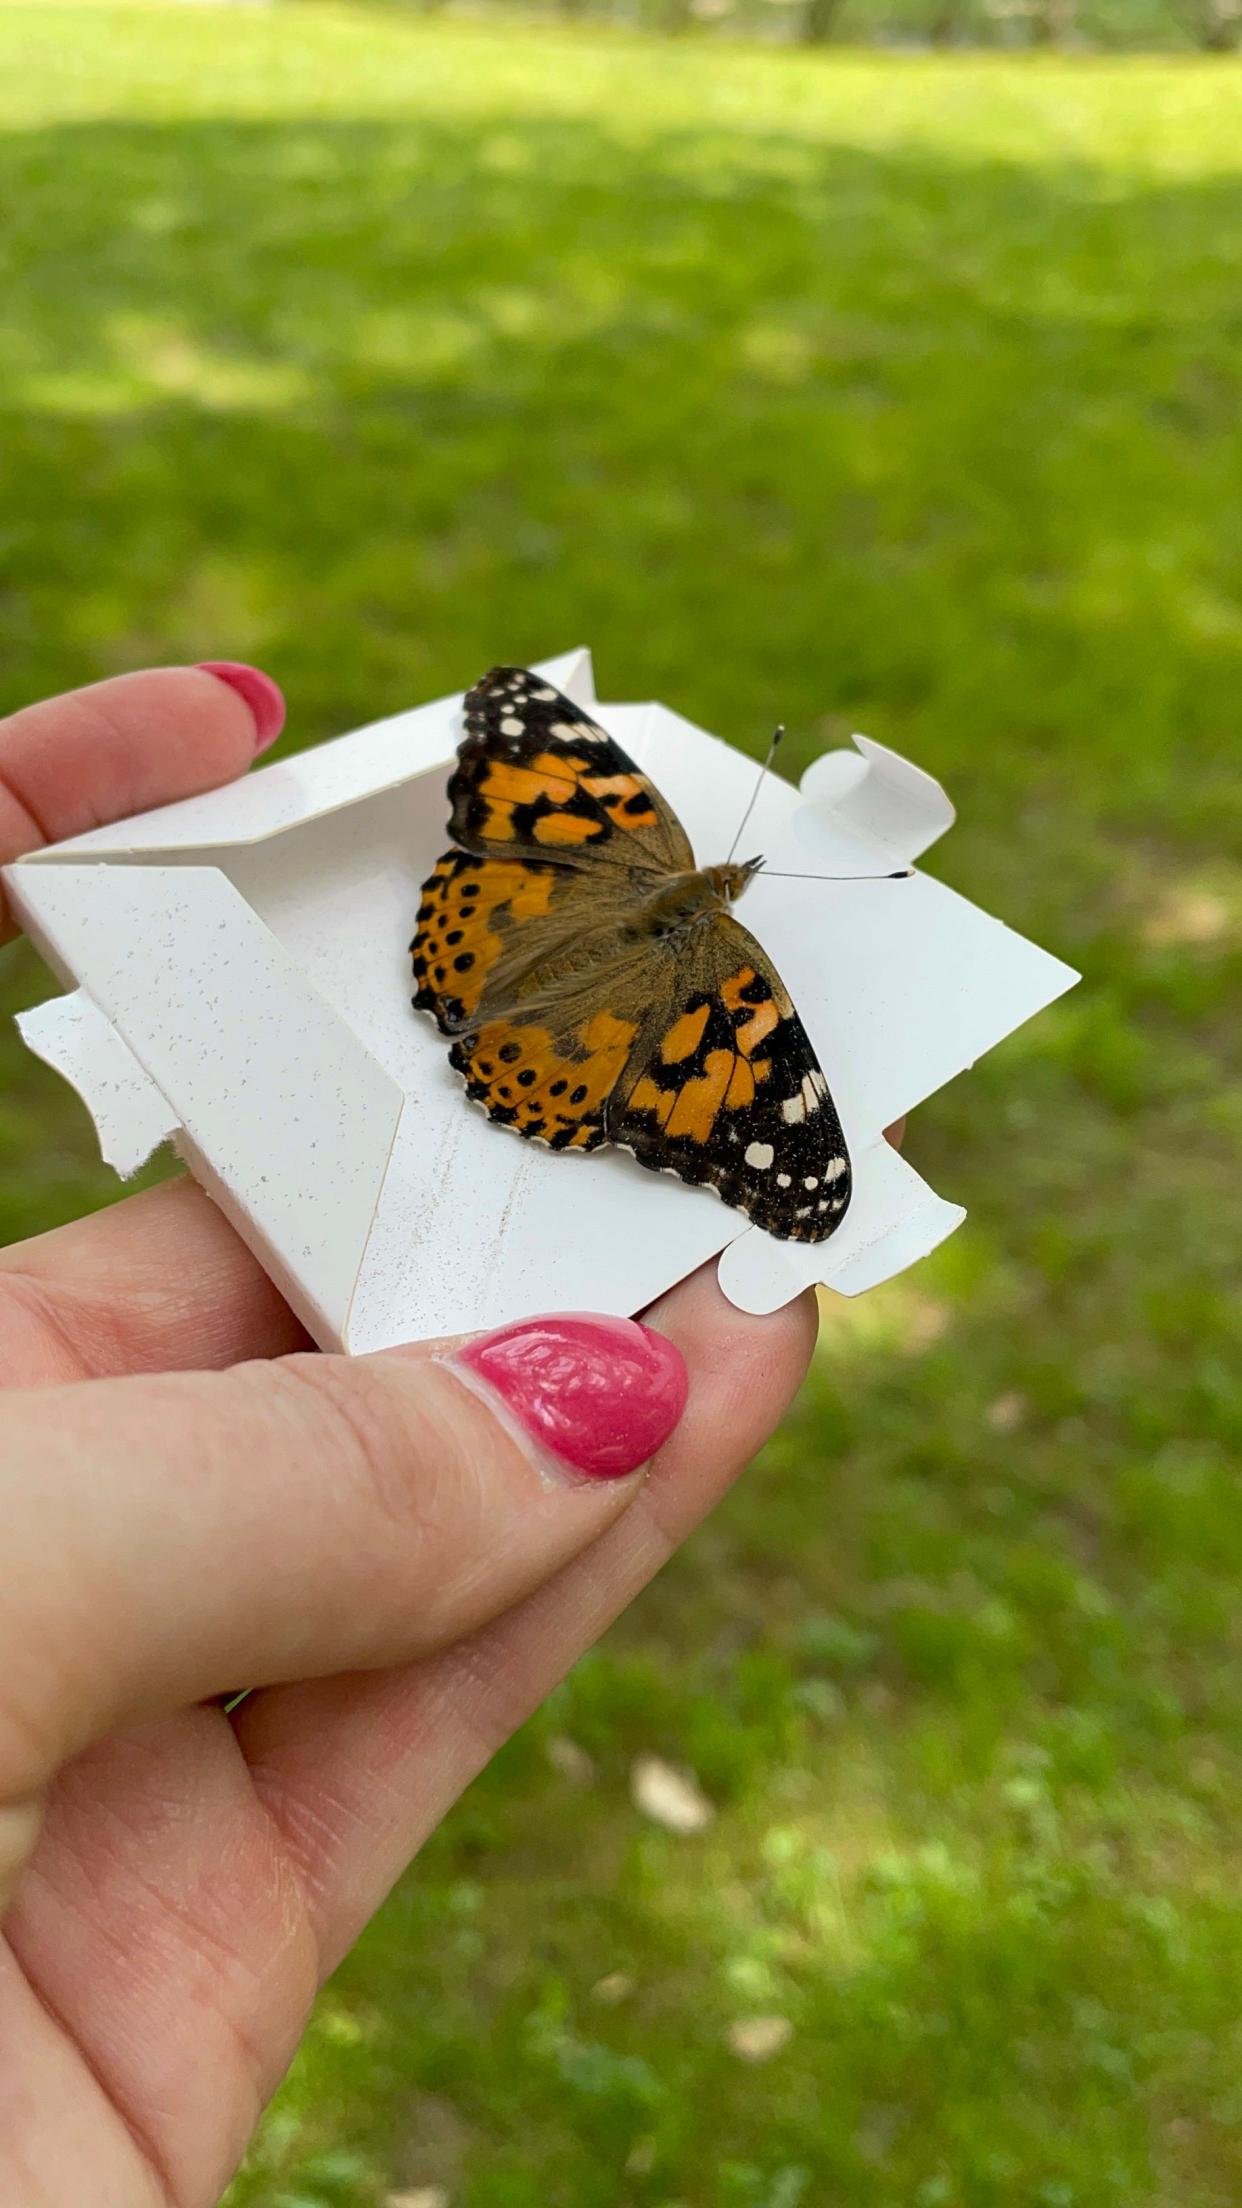 Last year’s Ohio’s Hospice LifeCare Butterfly Release raised more than $11,000 to support patient care and services. This year's event is June 2.